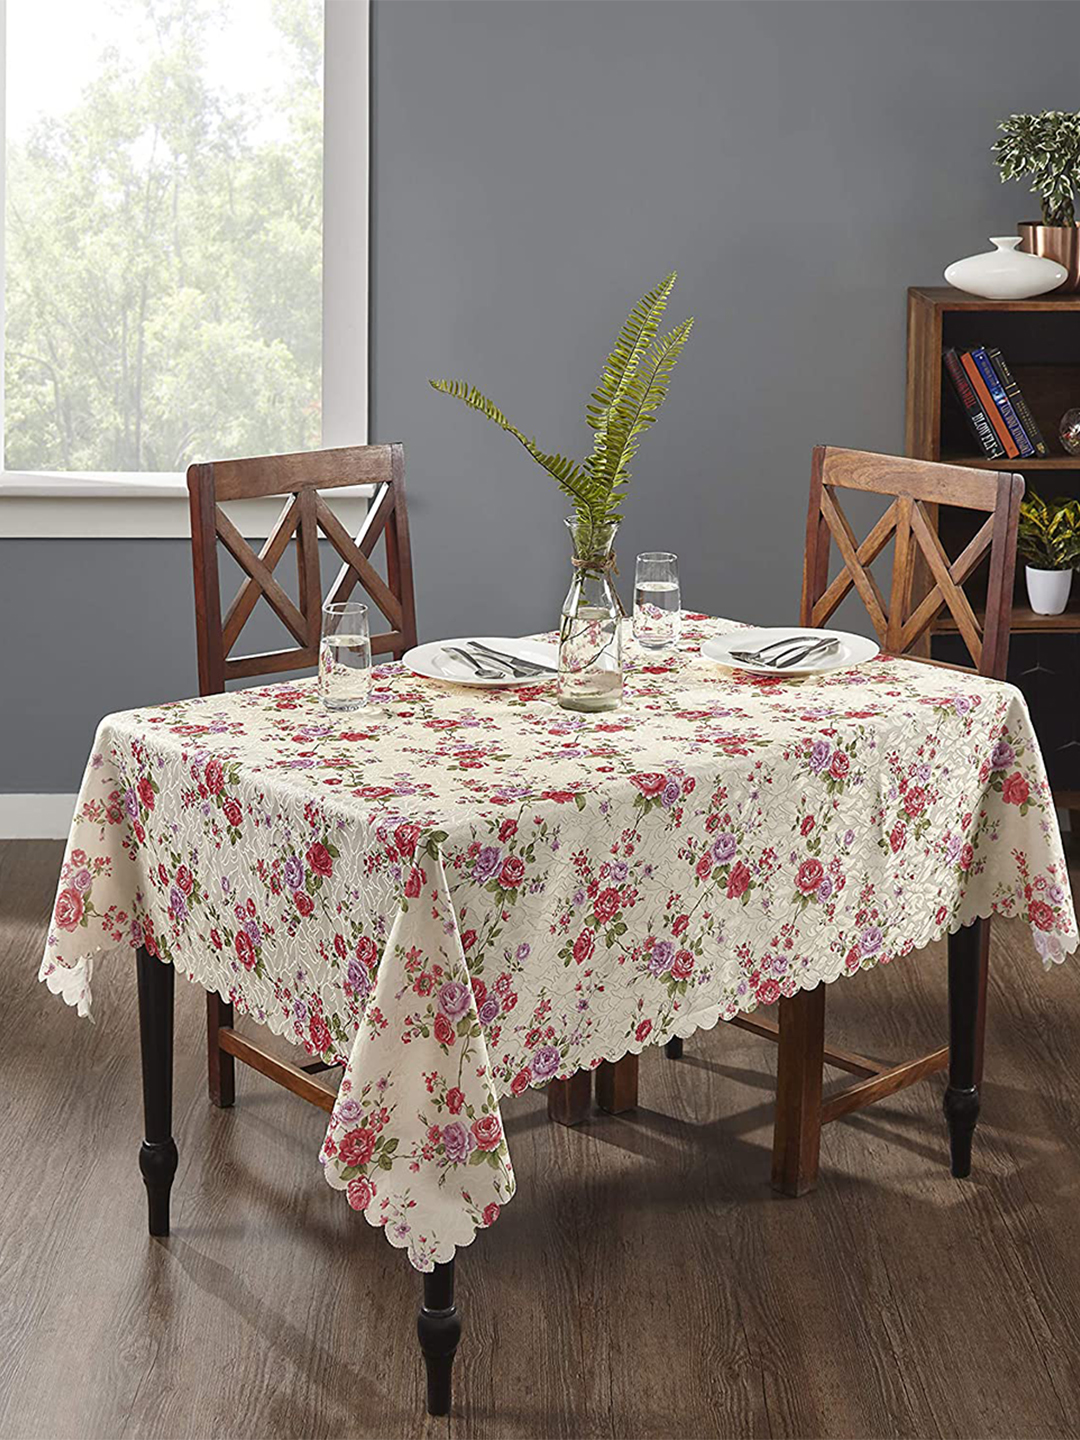 homewards Ivory Premium Digitally Printed Floral Design Polyester 6 Seater Rectangle Table Cover